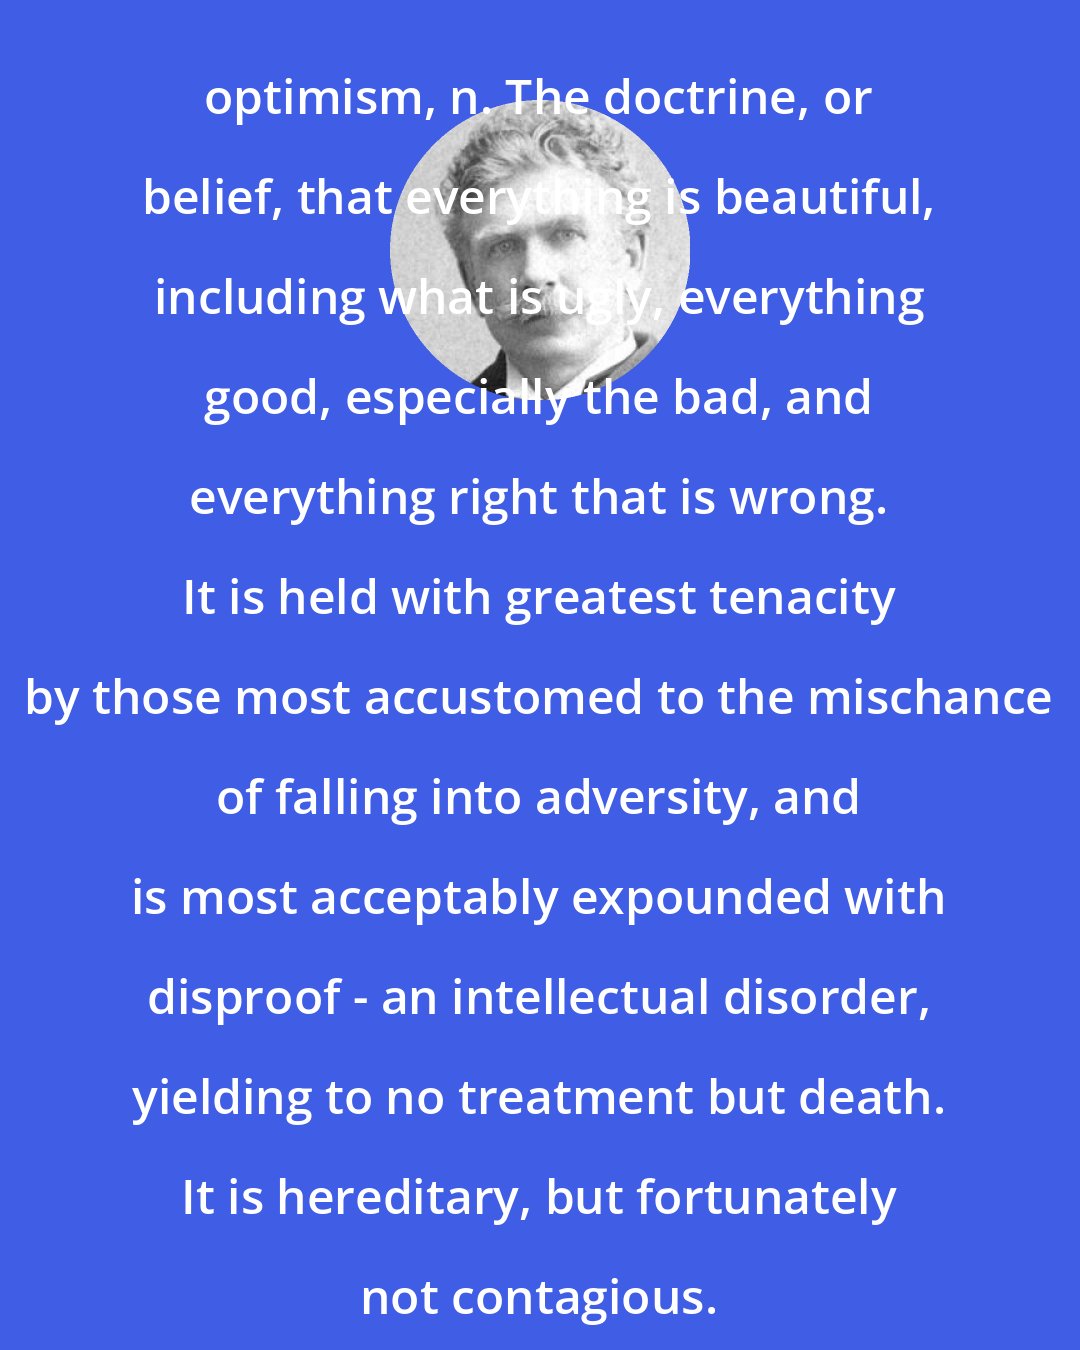 Ambrose Bierce: optimism, n. The doctrine, or belief, that everything is beautiful, including what is ugly, everything good, especially the bad, and everything right that is wrong. It is held with greatest tenacity by those most accustomed to the mischance of falling into adversity, and is most acceptably expounded with disproof - an intellectual disorder, yielding to no treatment but death. It is hereditary, but fortunately not contagious.